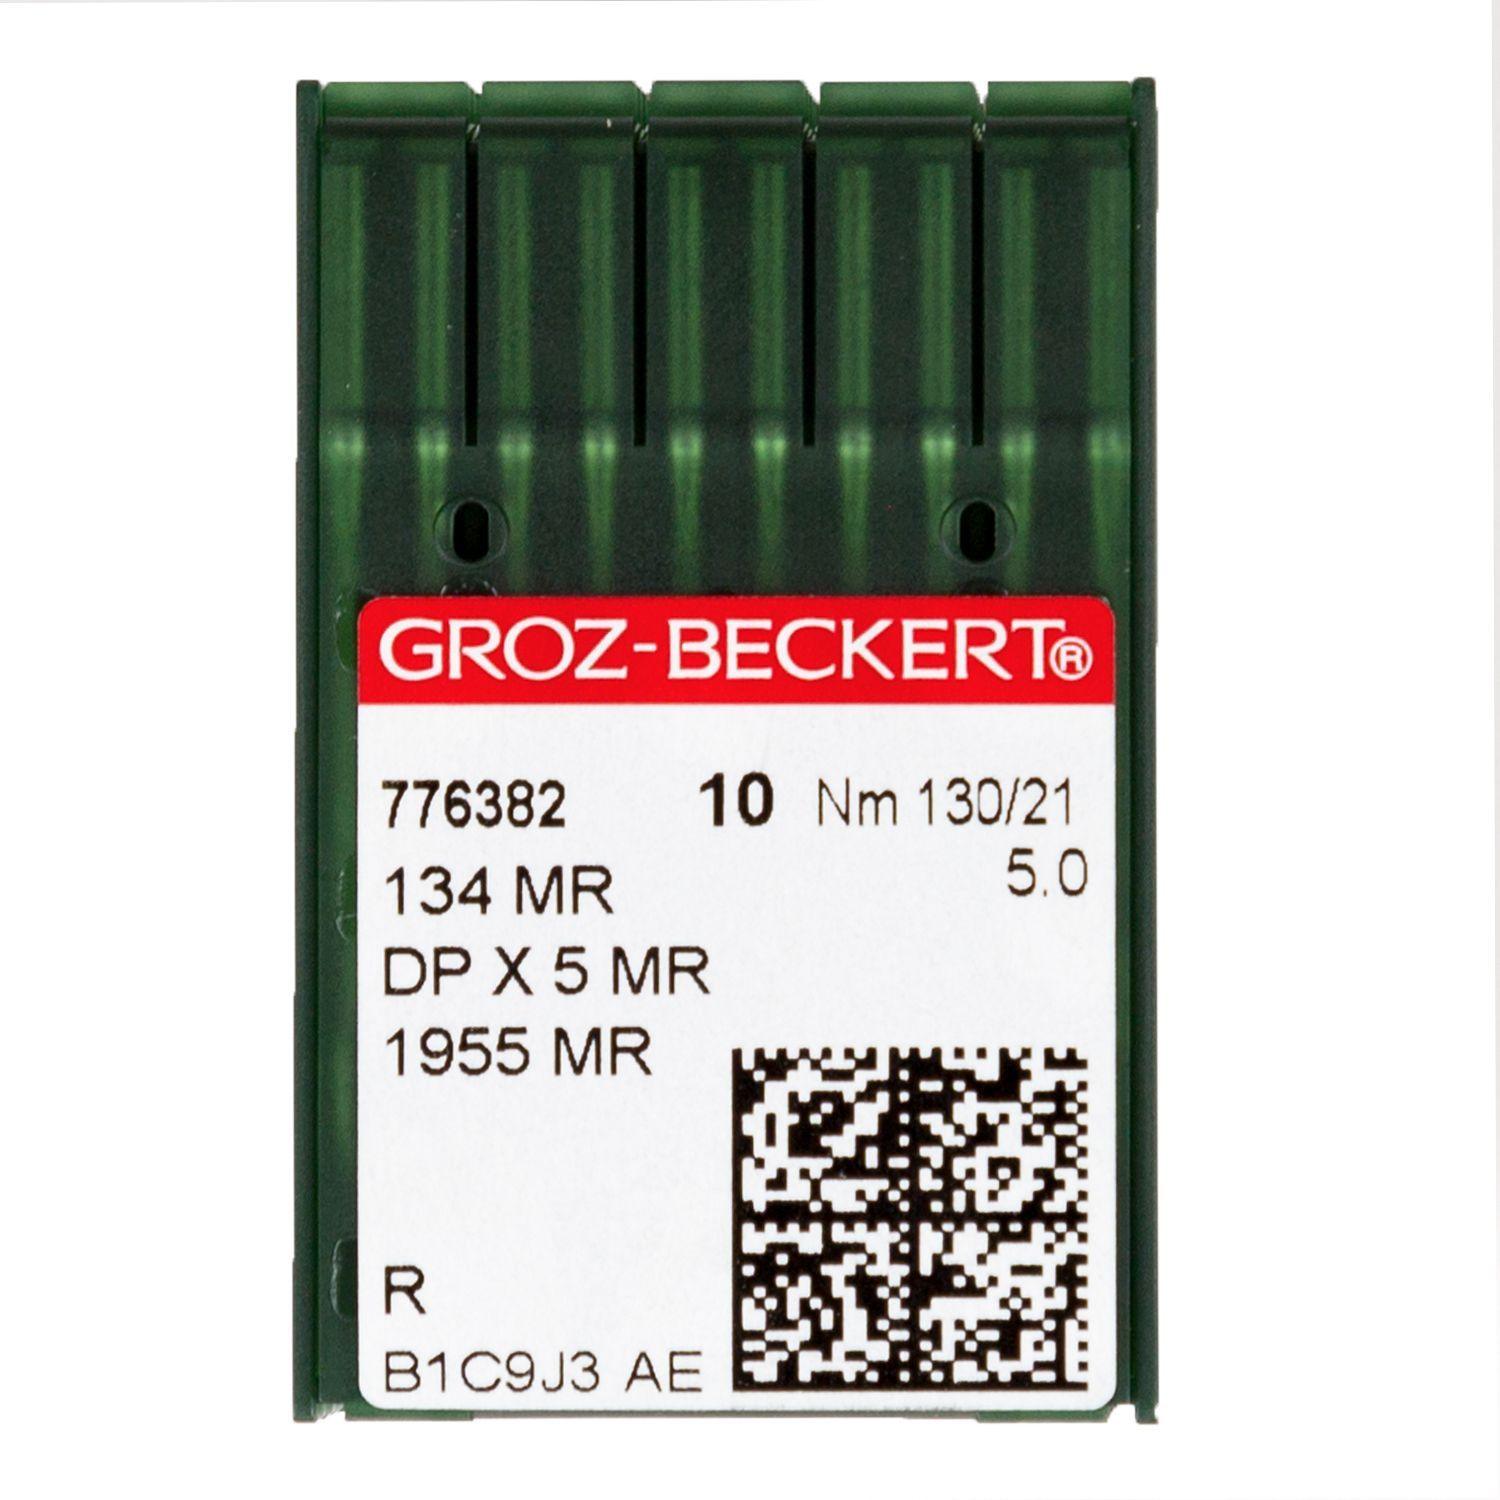 Groz-Beckert Size 130/21 (5.0) MR Steel Needle - 1 Package of 10 Needles - Kawartha Quilting and Sewing LTD.